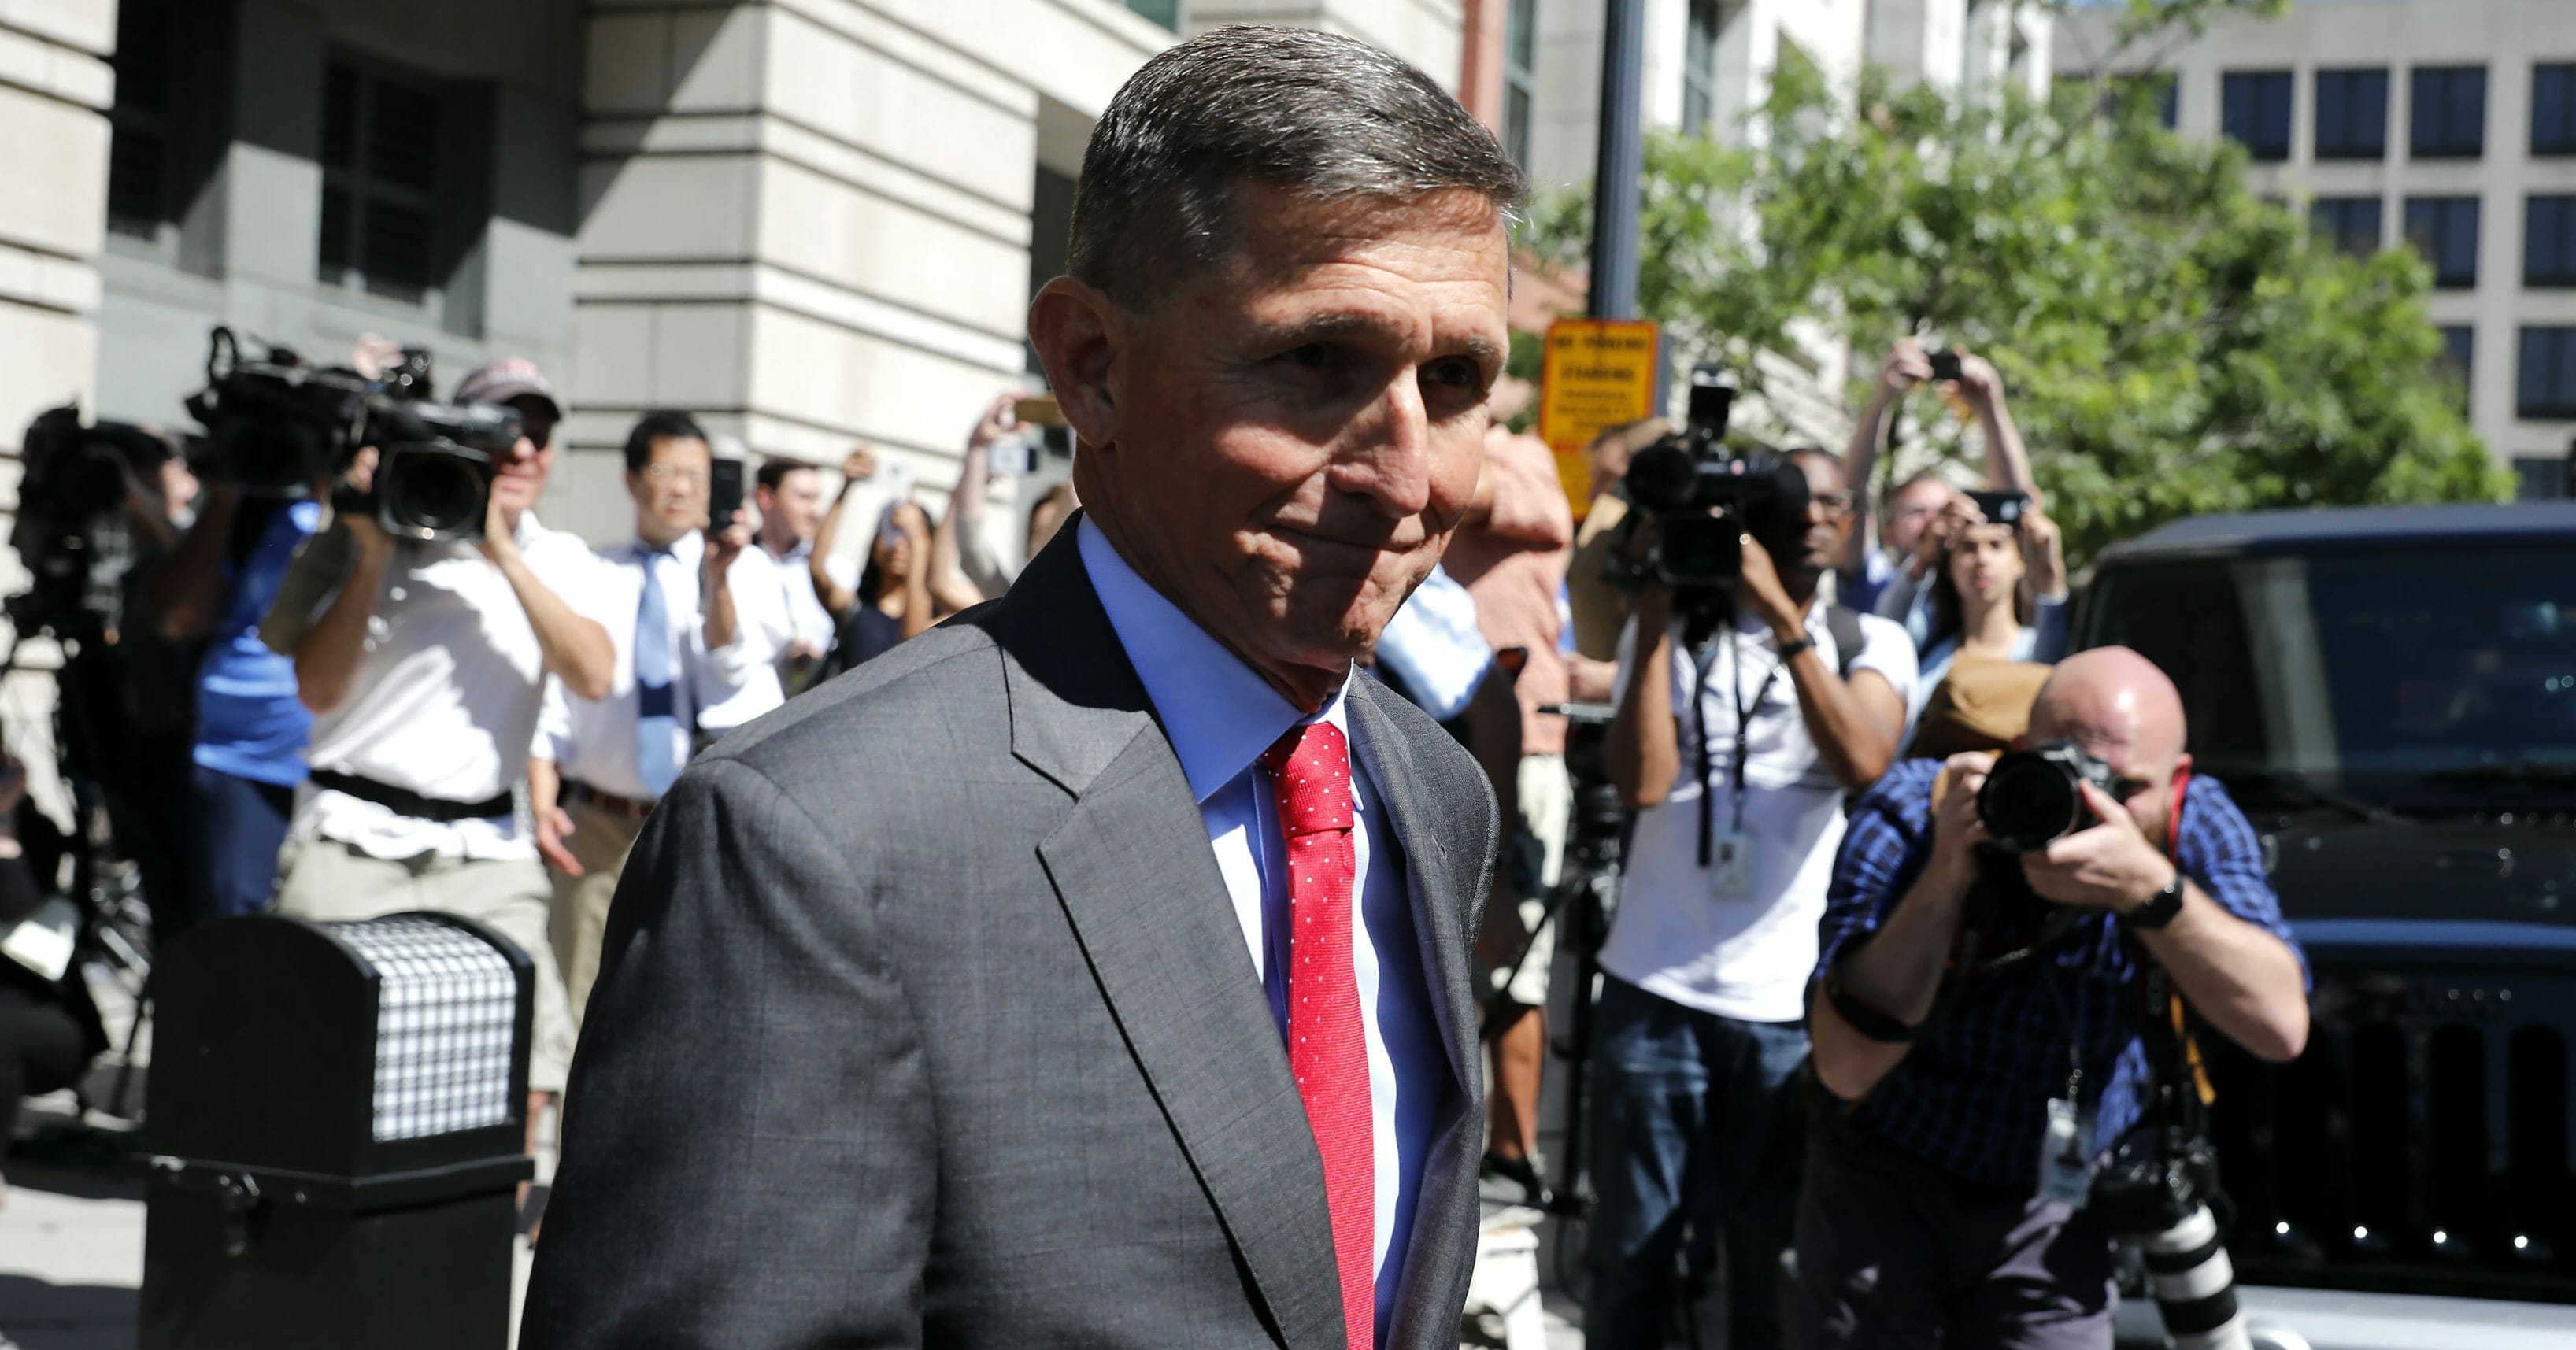 Michael Flynn Returns To Court For Pre-Sentencing Hearing